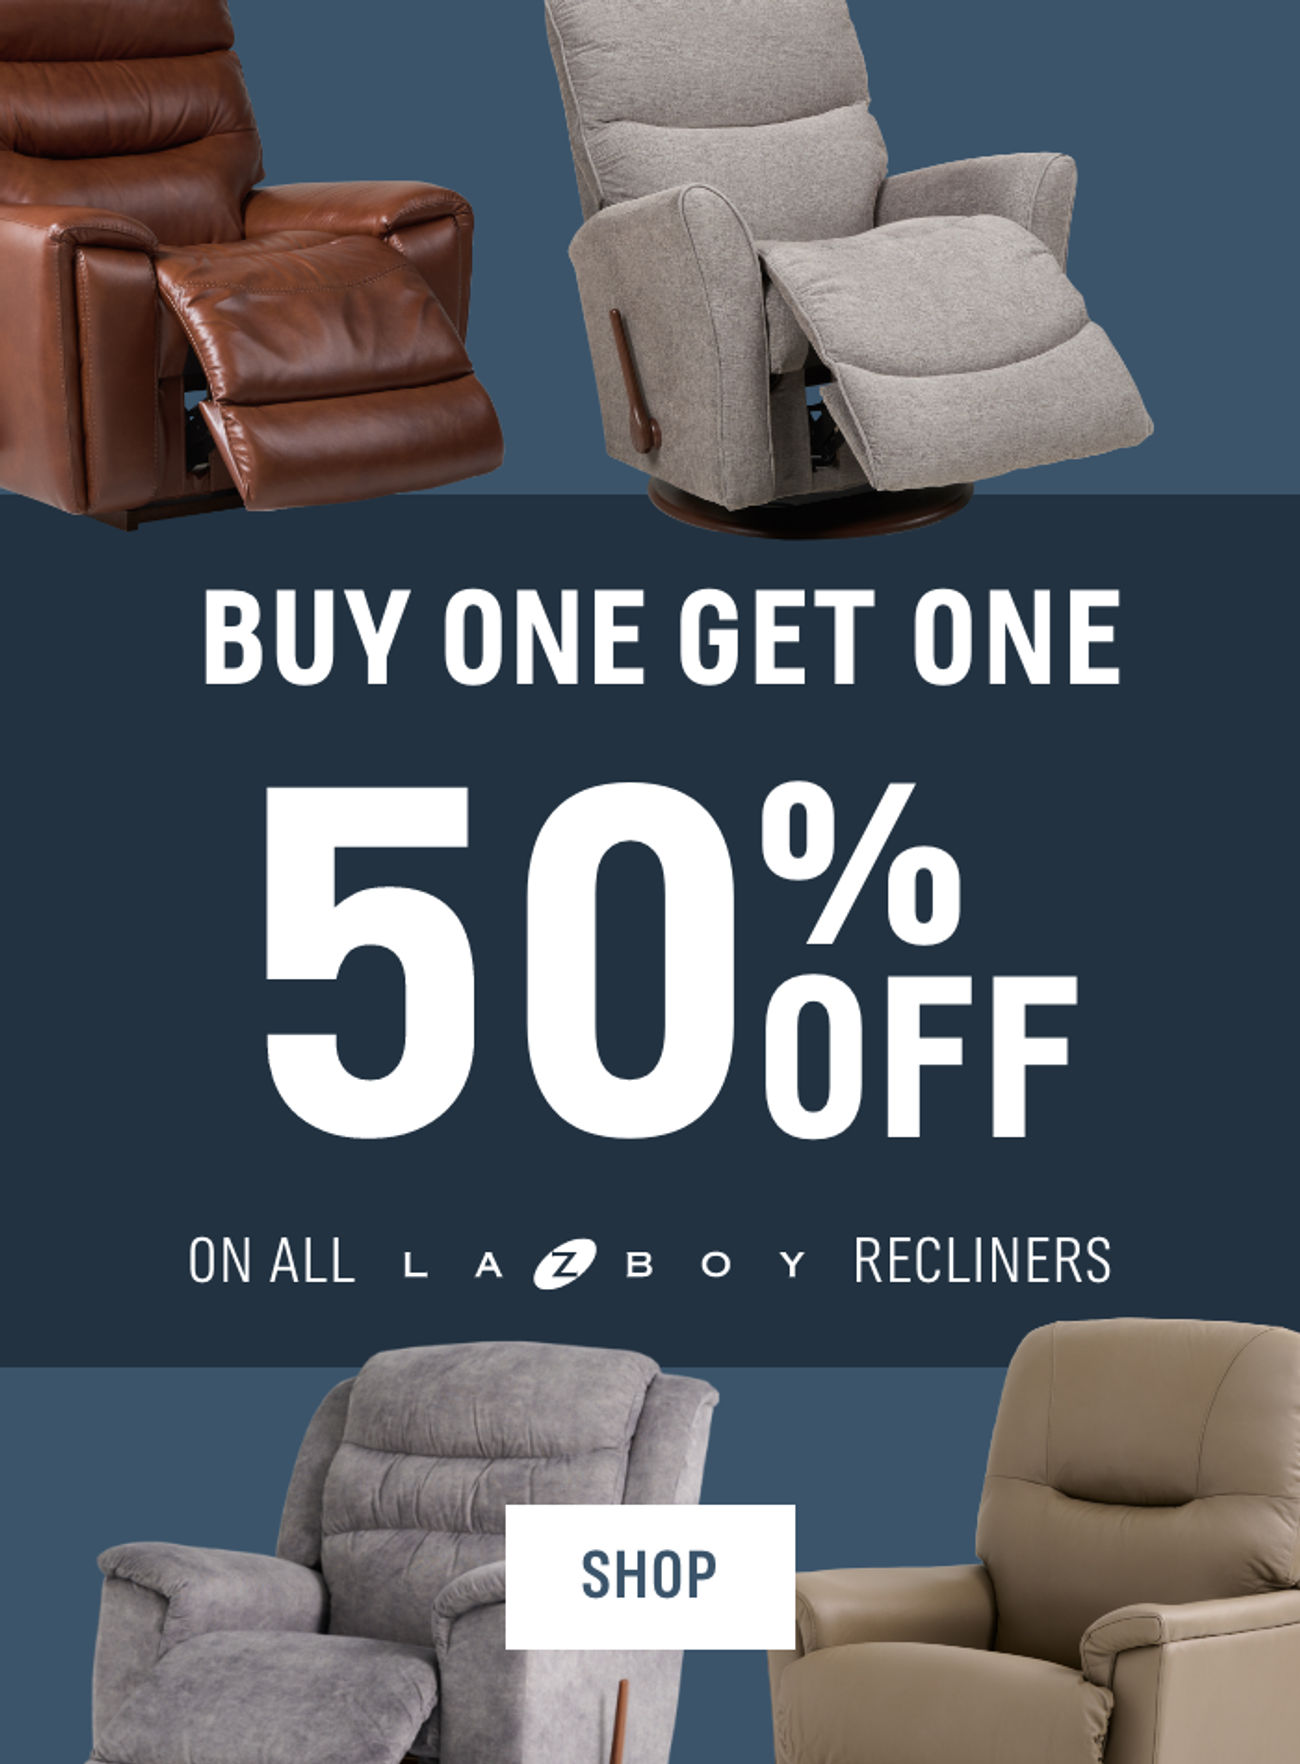 Furniture Clearance Up to 50% + Get an Extra 10% Off